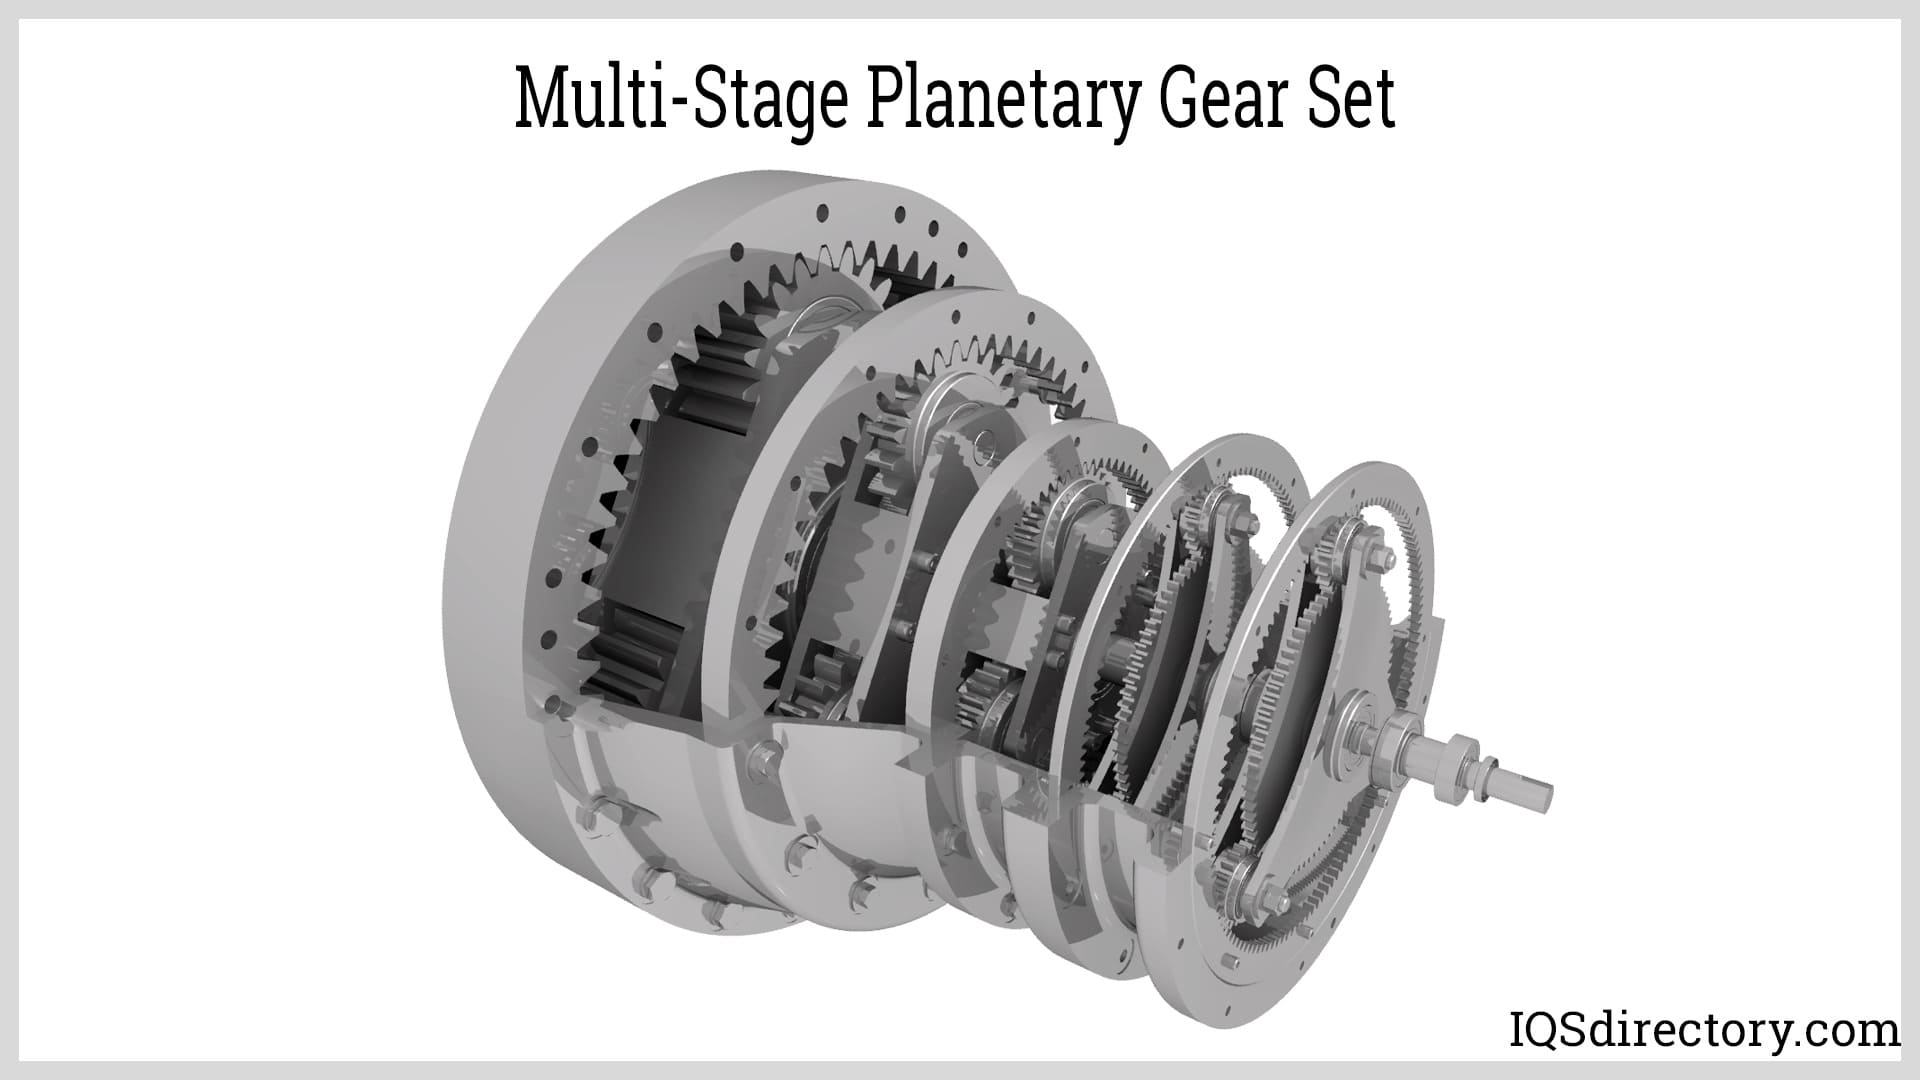 Multi-Stage Planetary Gear Set